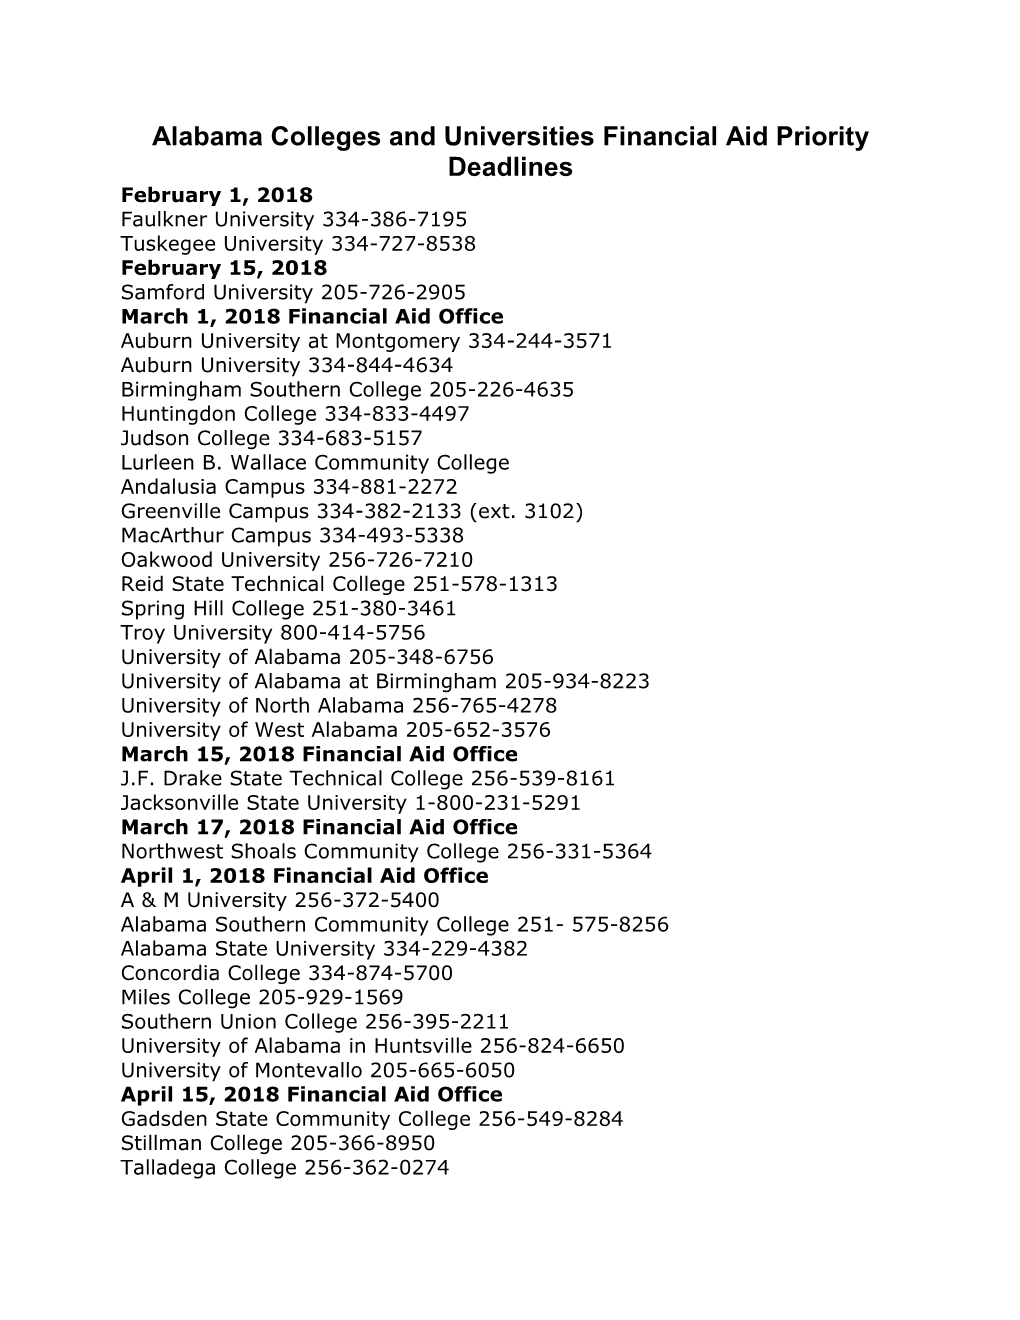 Alabama Colleges and Universities Financial Aid Priority Deadlines